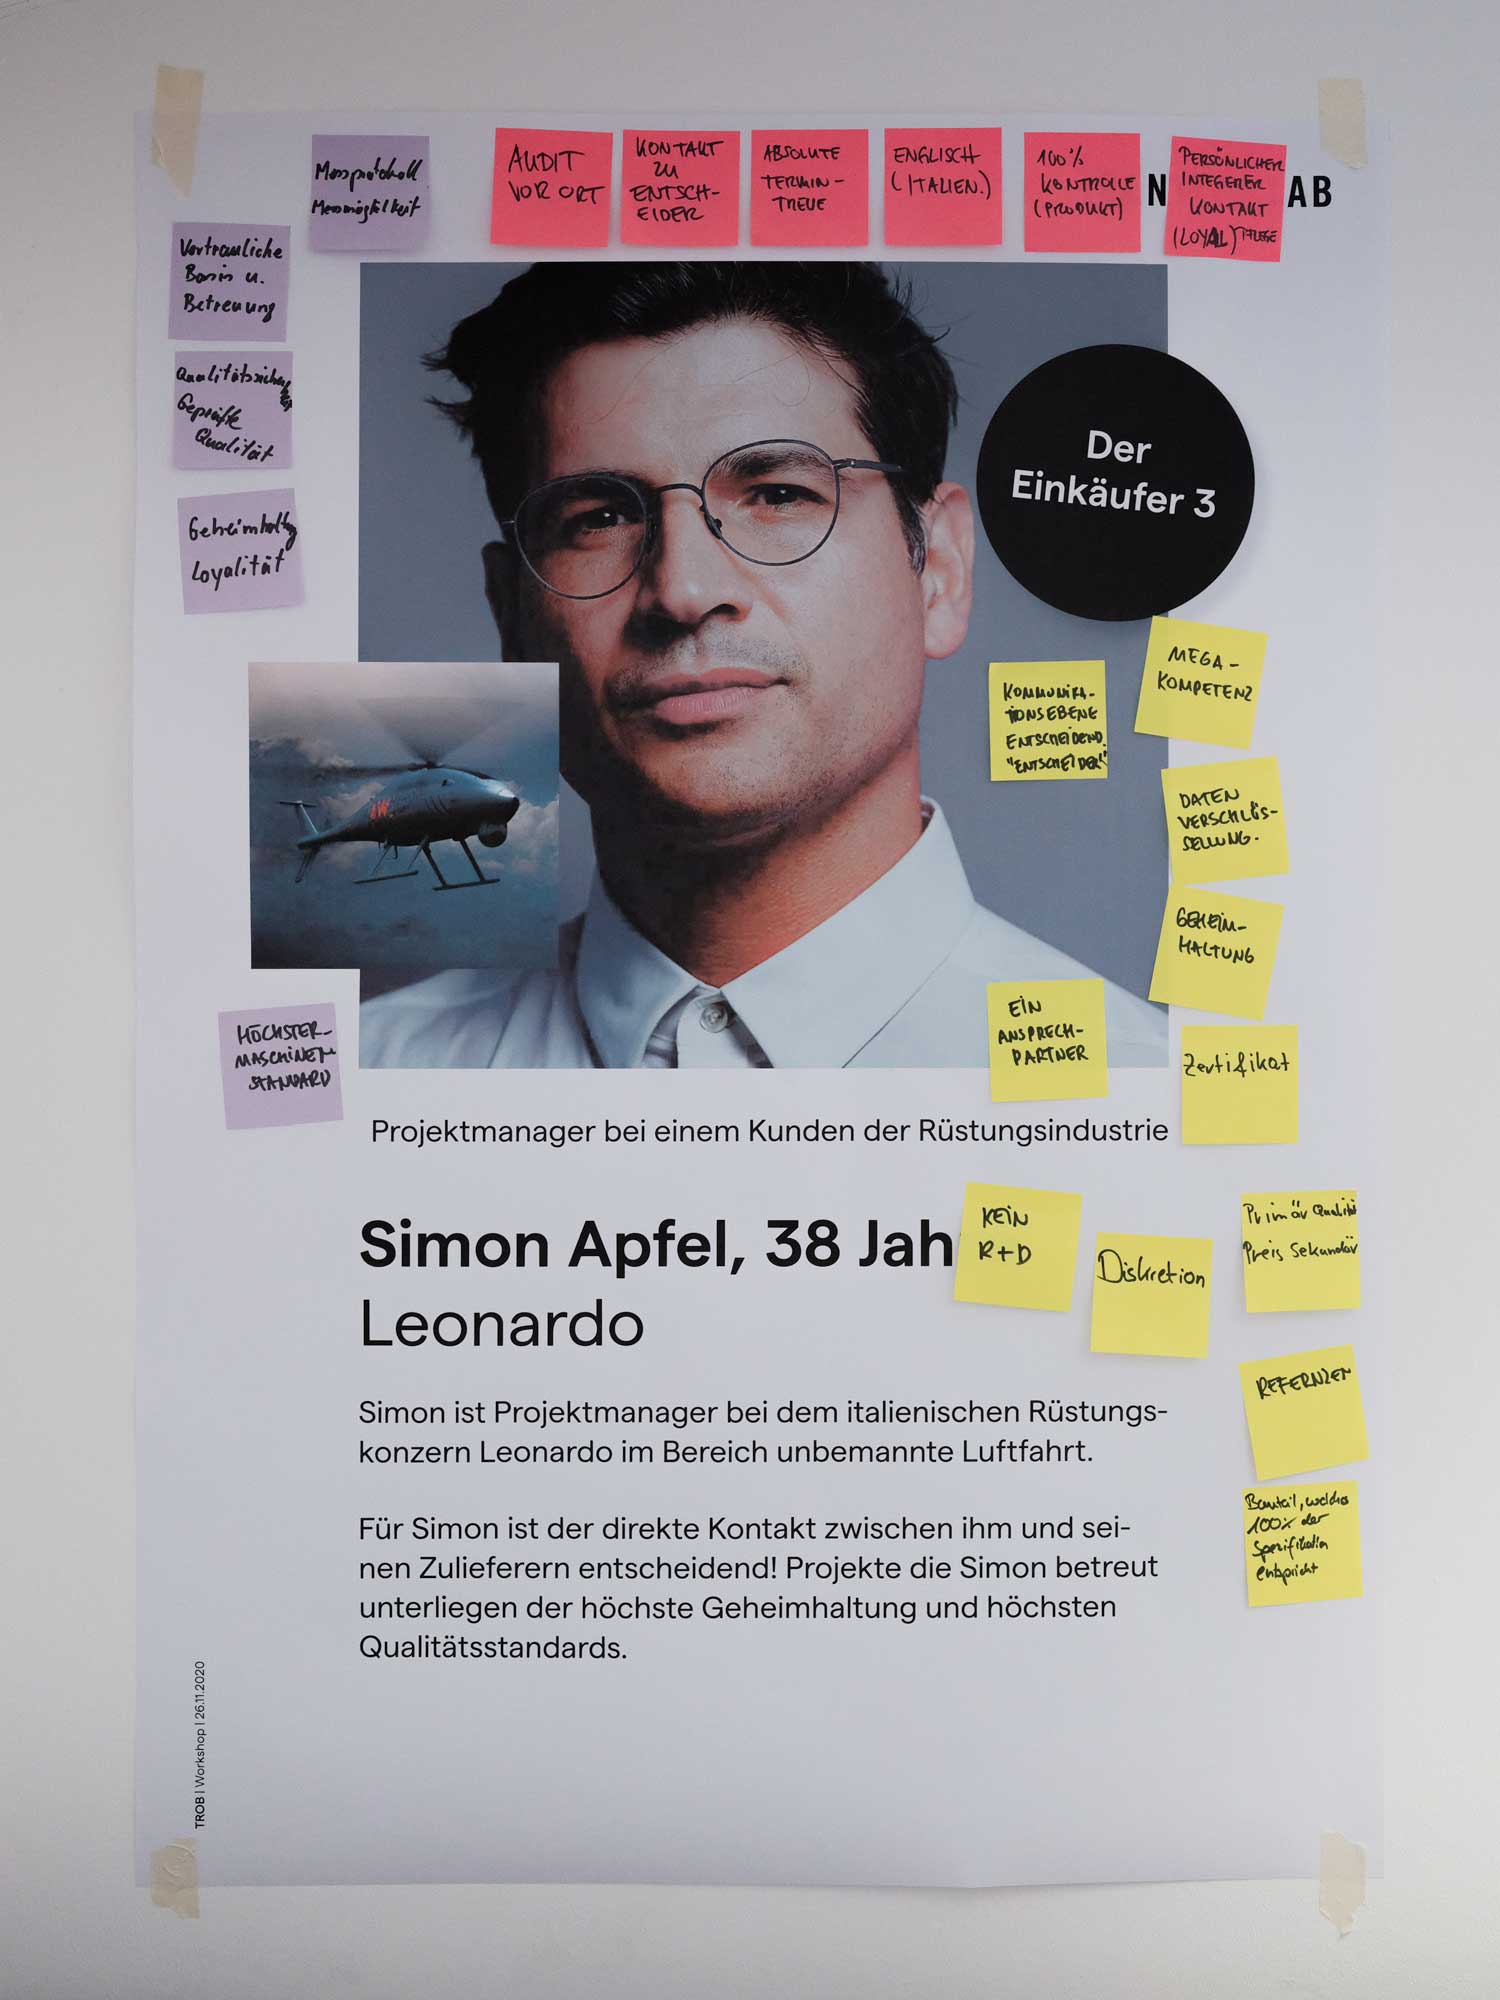 This image shows a photo of a workshop poster by Identity Lab on the topic of target groups at Trob.